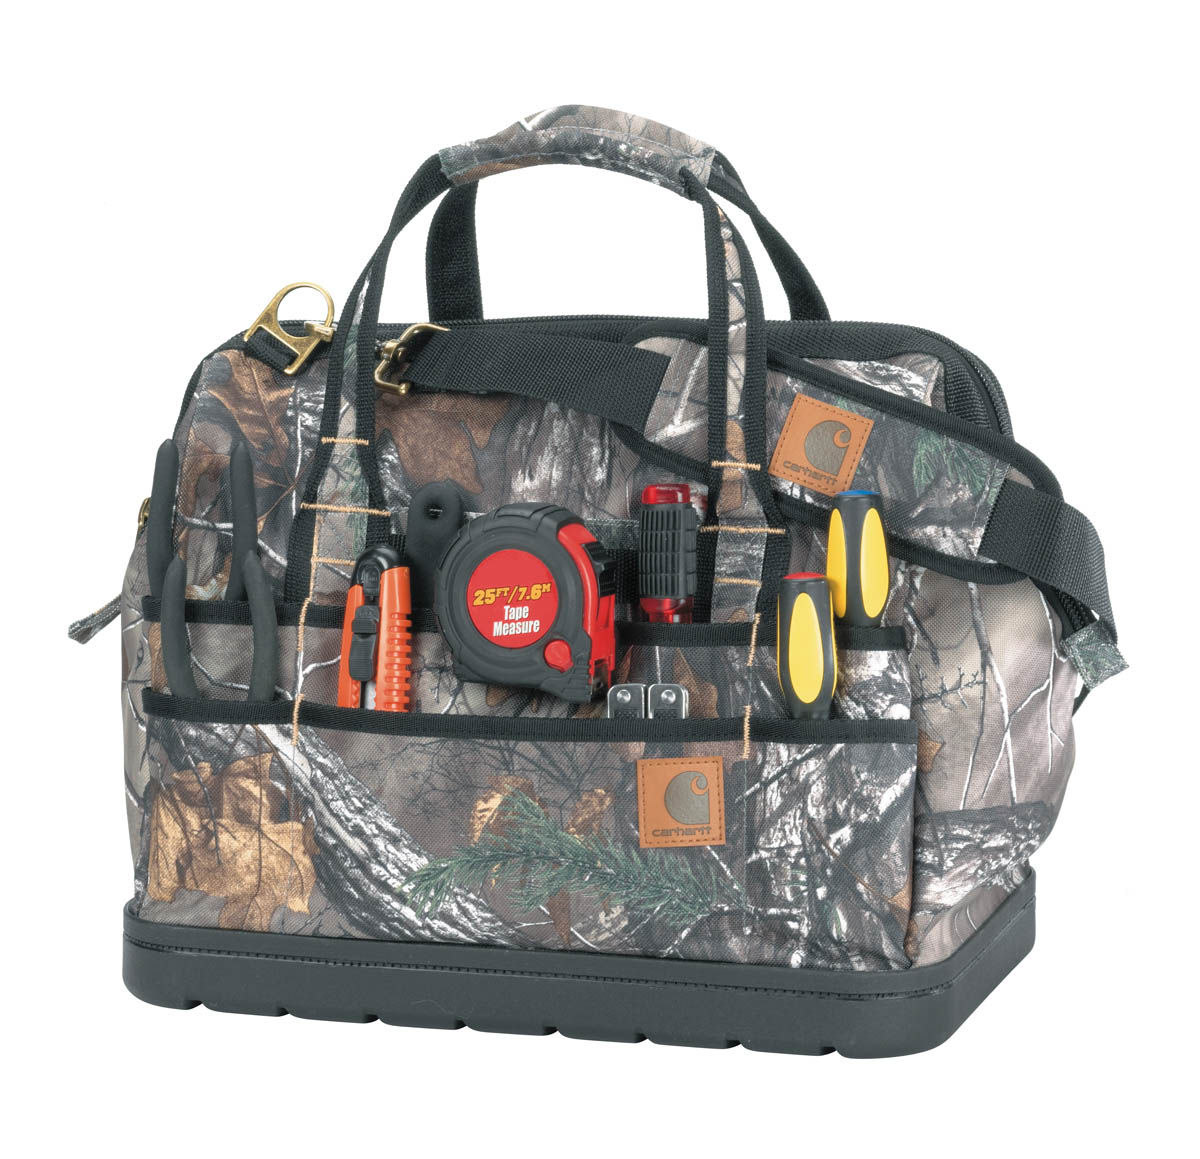 Carhartt Legacy 16 Inch Tool Bag with Molded Base Discontinued Pricing